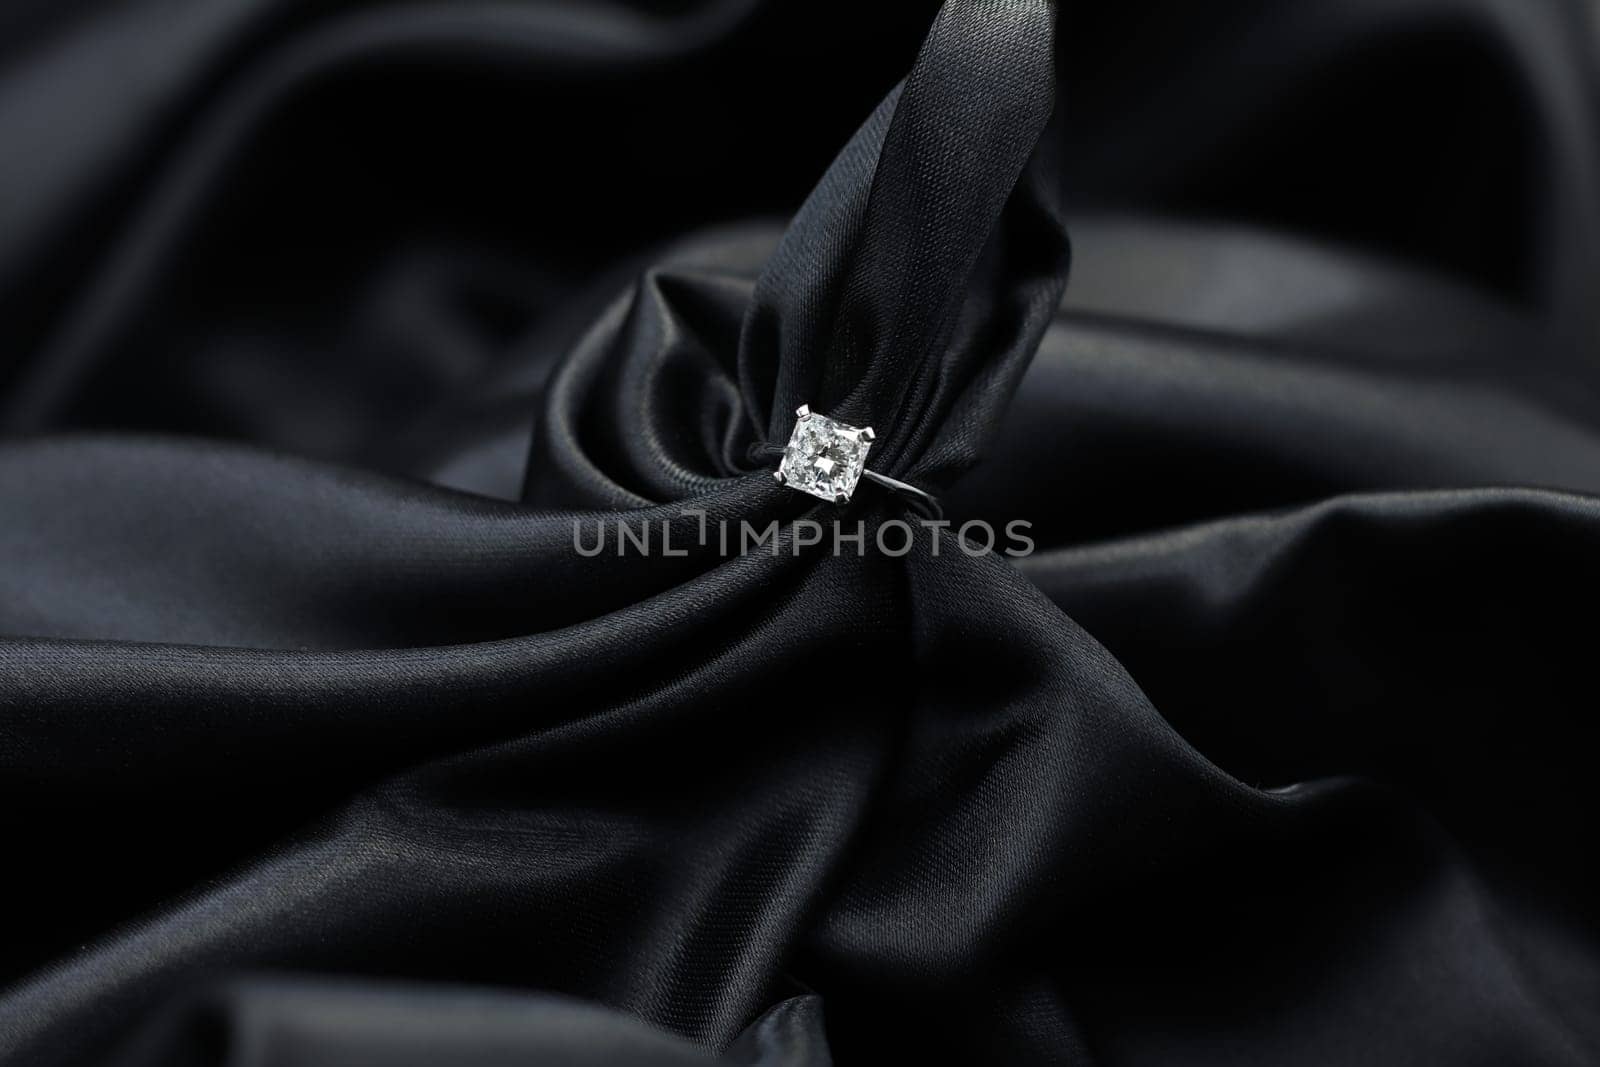 Fine jewelry as diamond ring in white gold or platinum setting with black satin fabric background. Jewelry shop concept for luxury store. engagement ring foe wedding couple lover